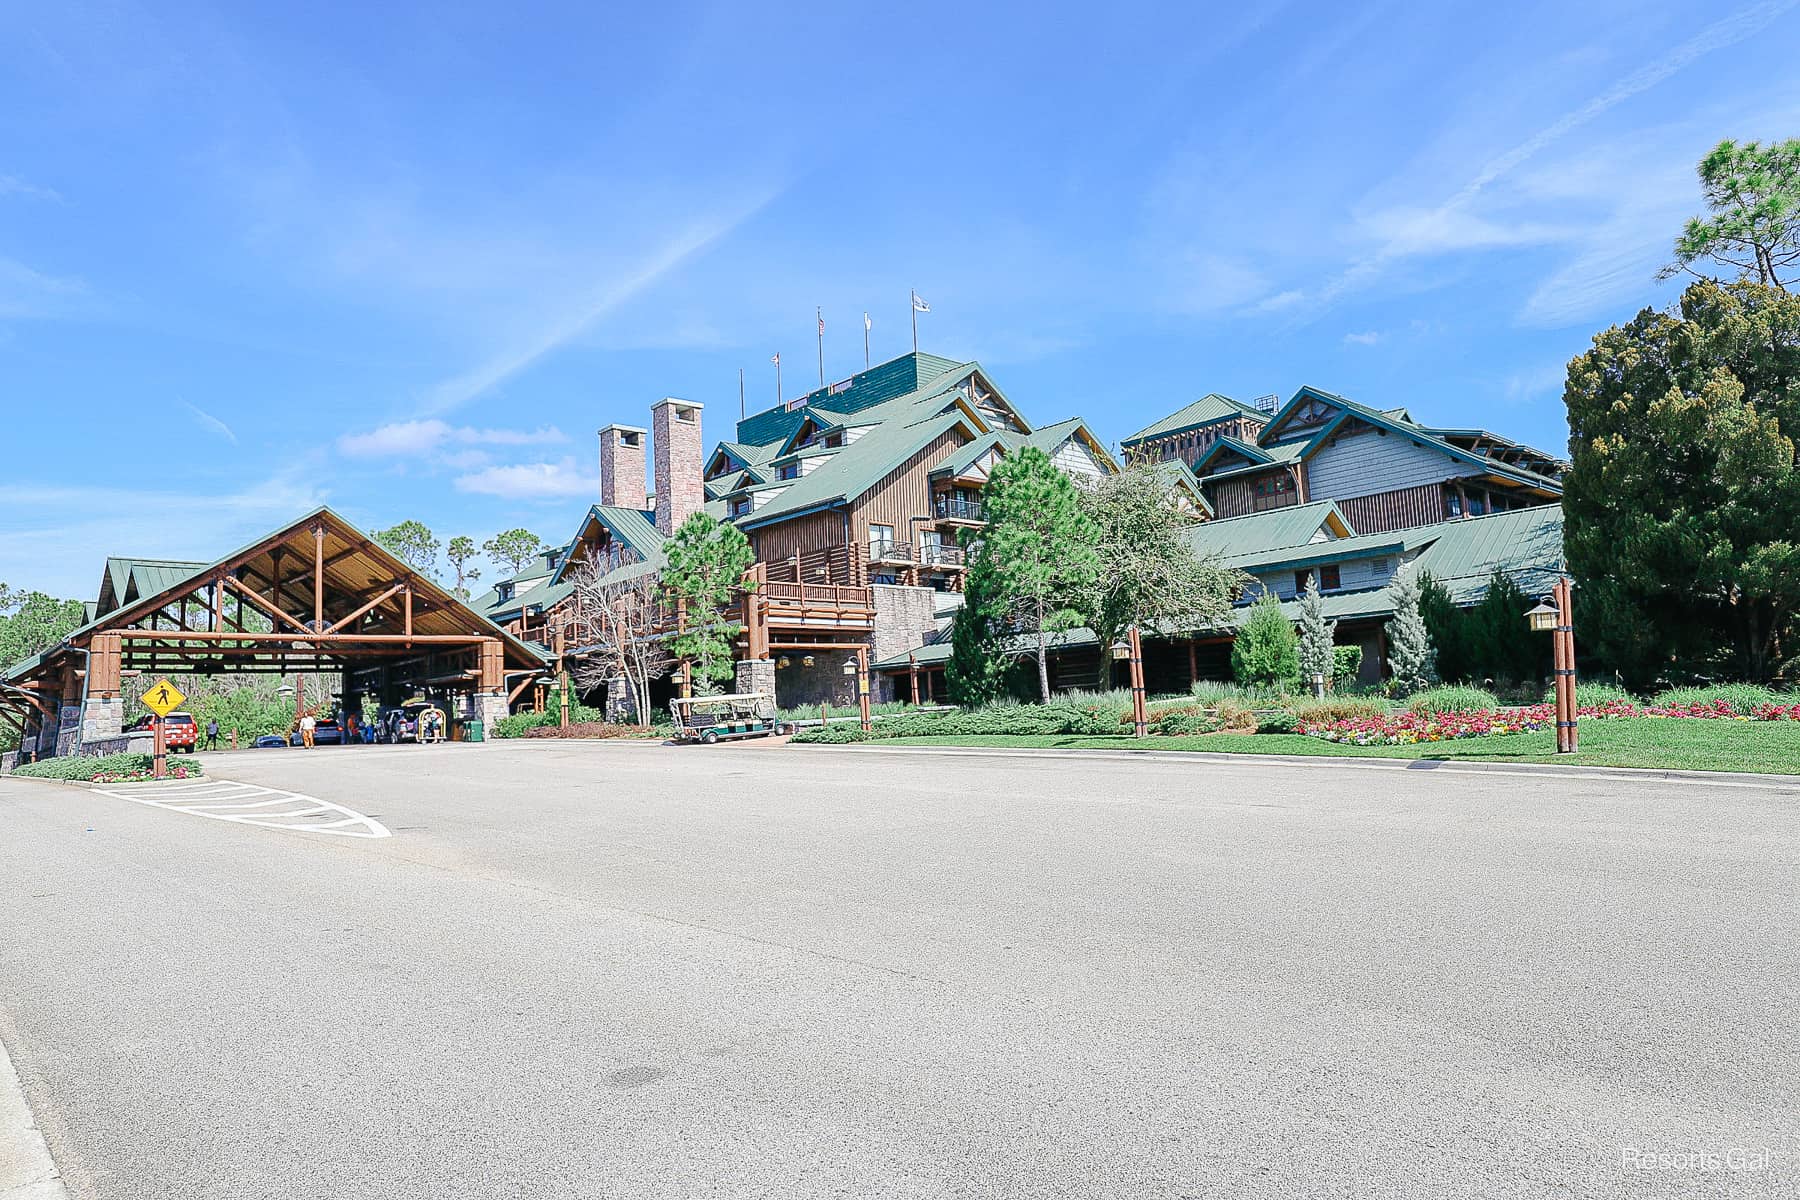 a view of the Wilderness Lodge that shows an angle where it looks like Old Faithful Inn 